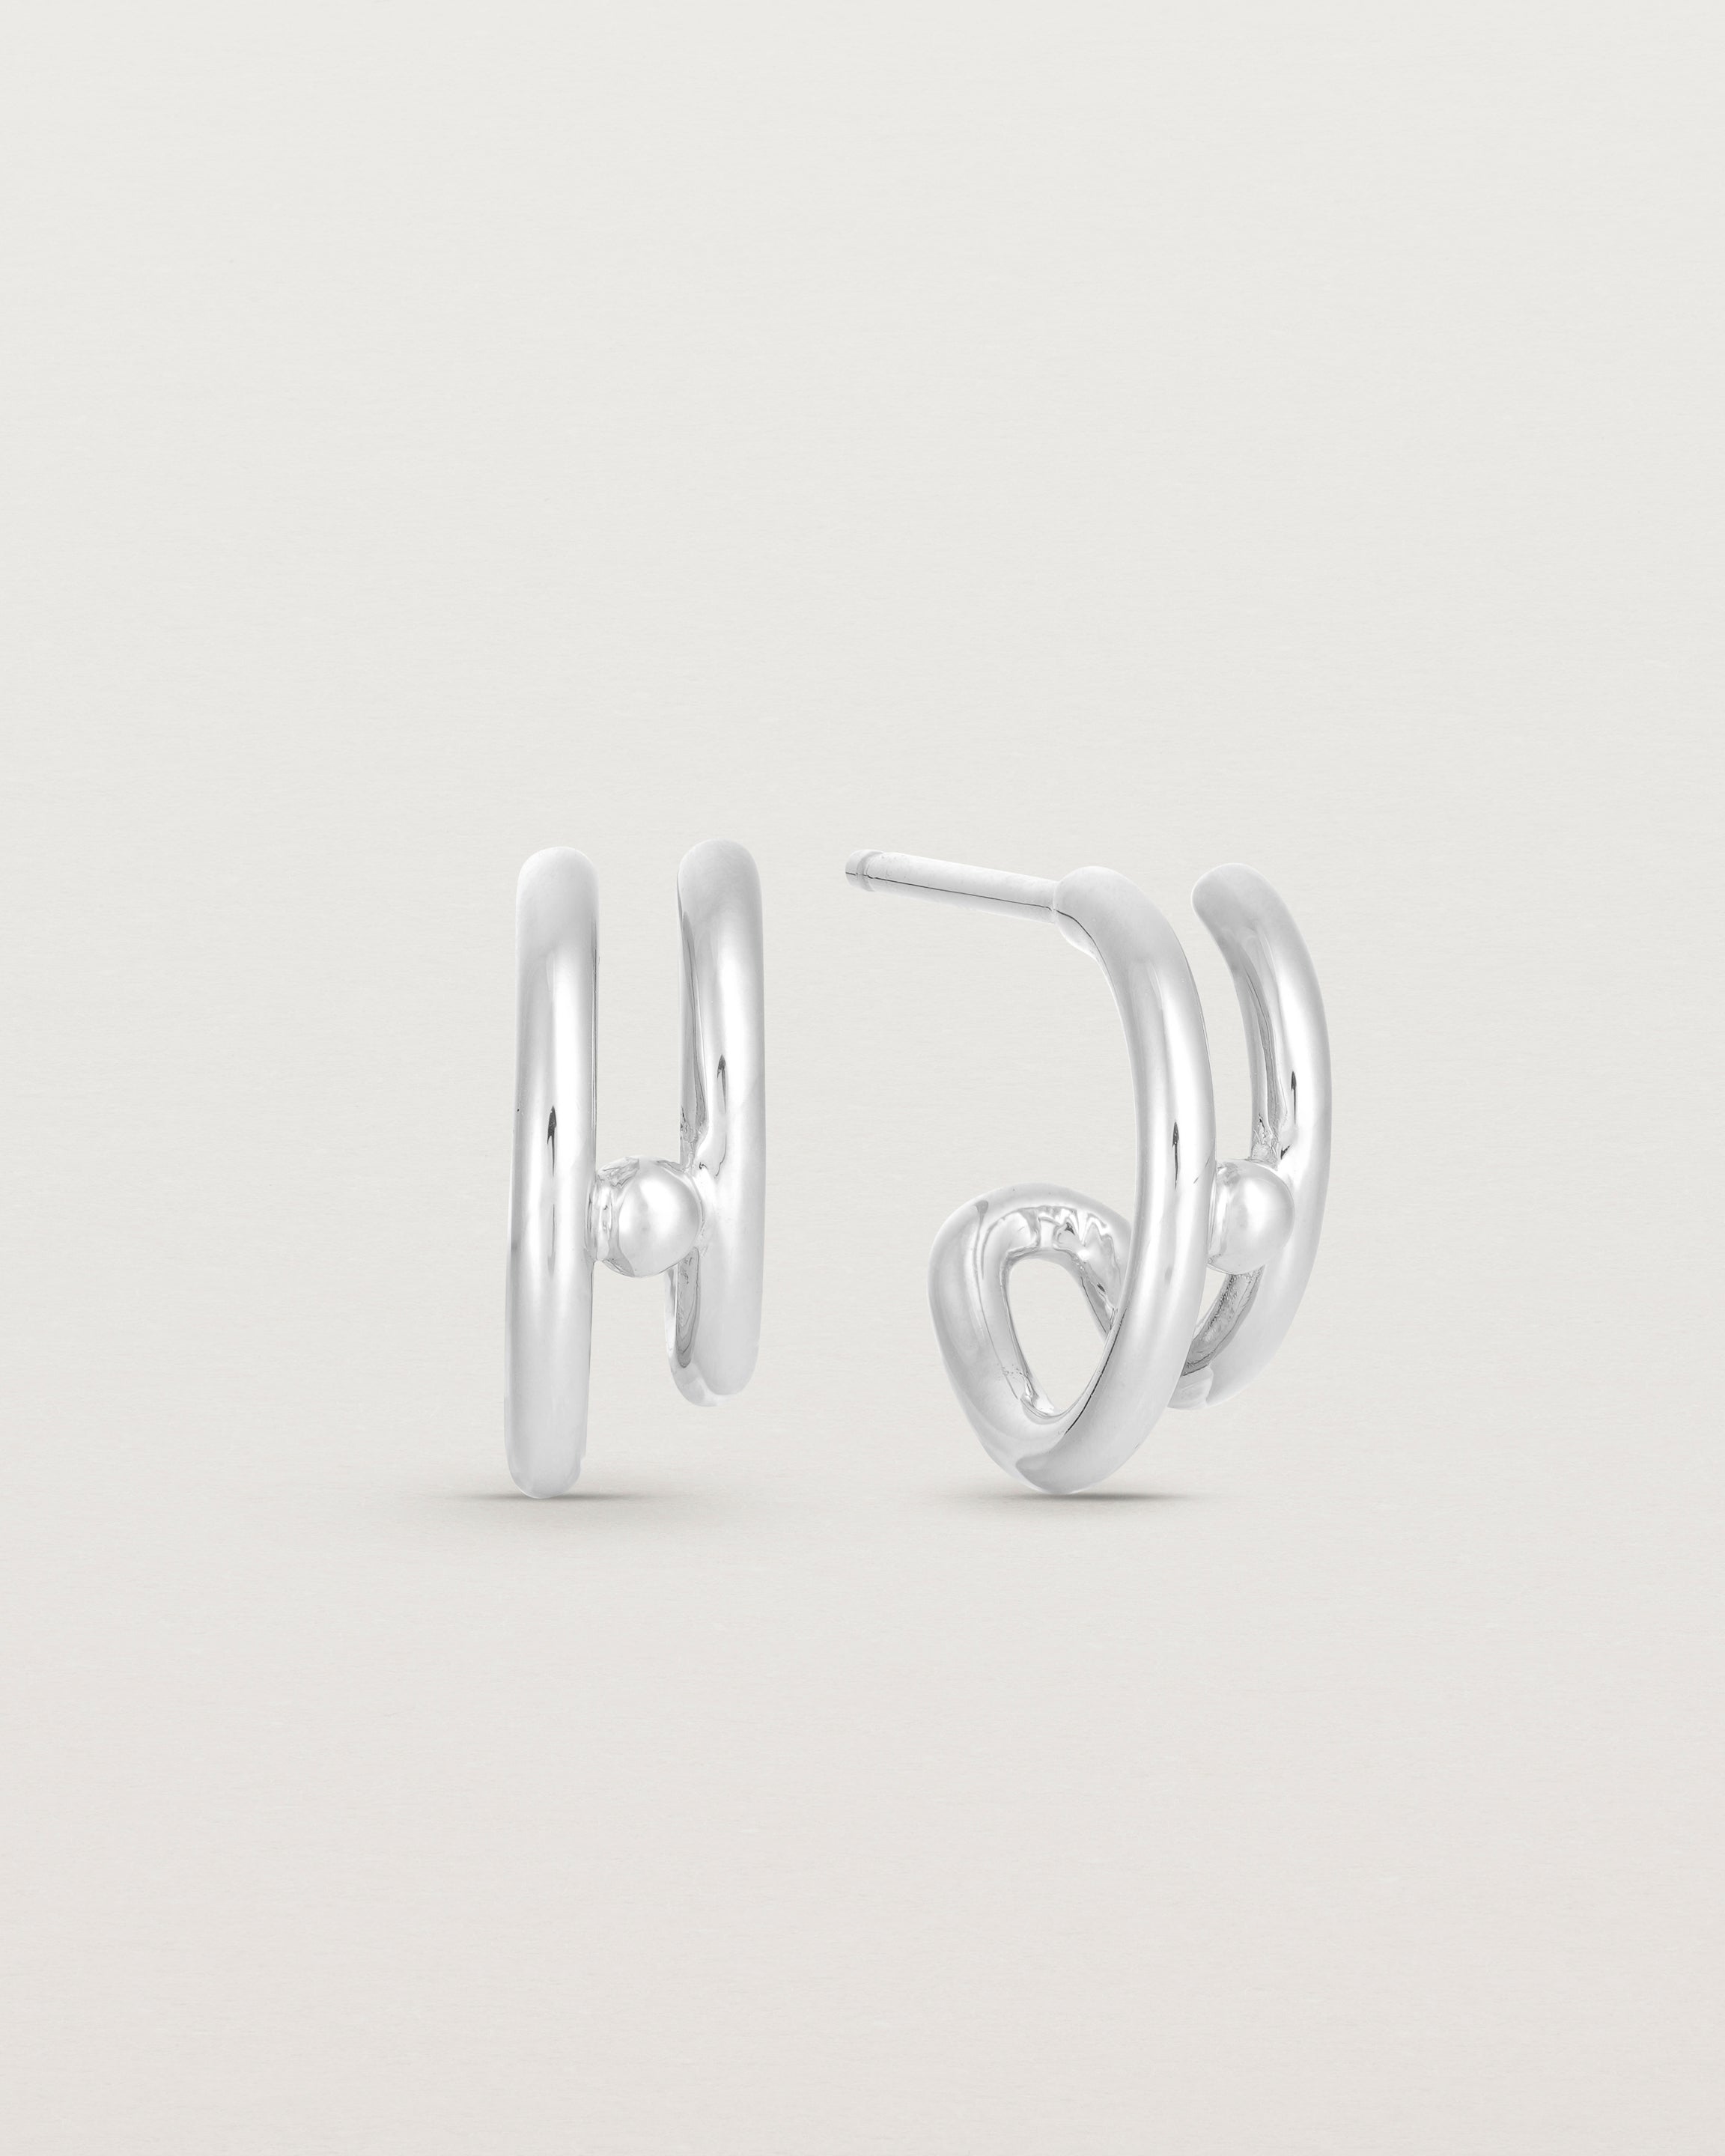 A pair of Double Reliquum Hoops in white gold.